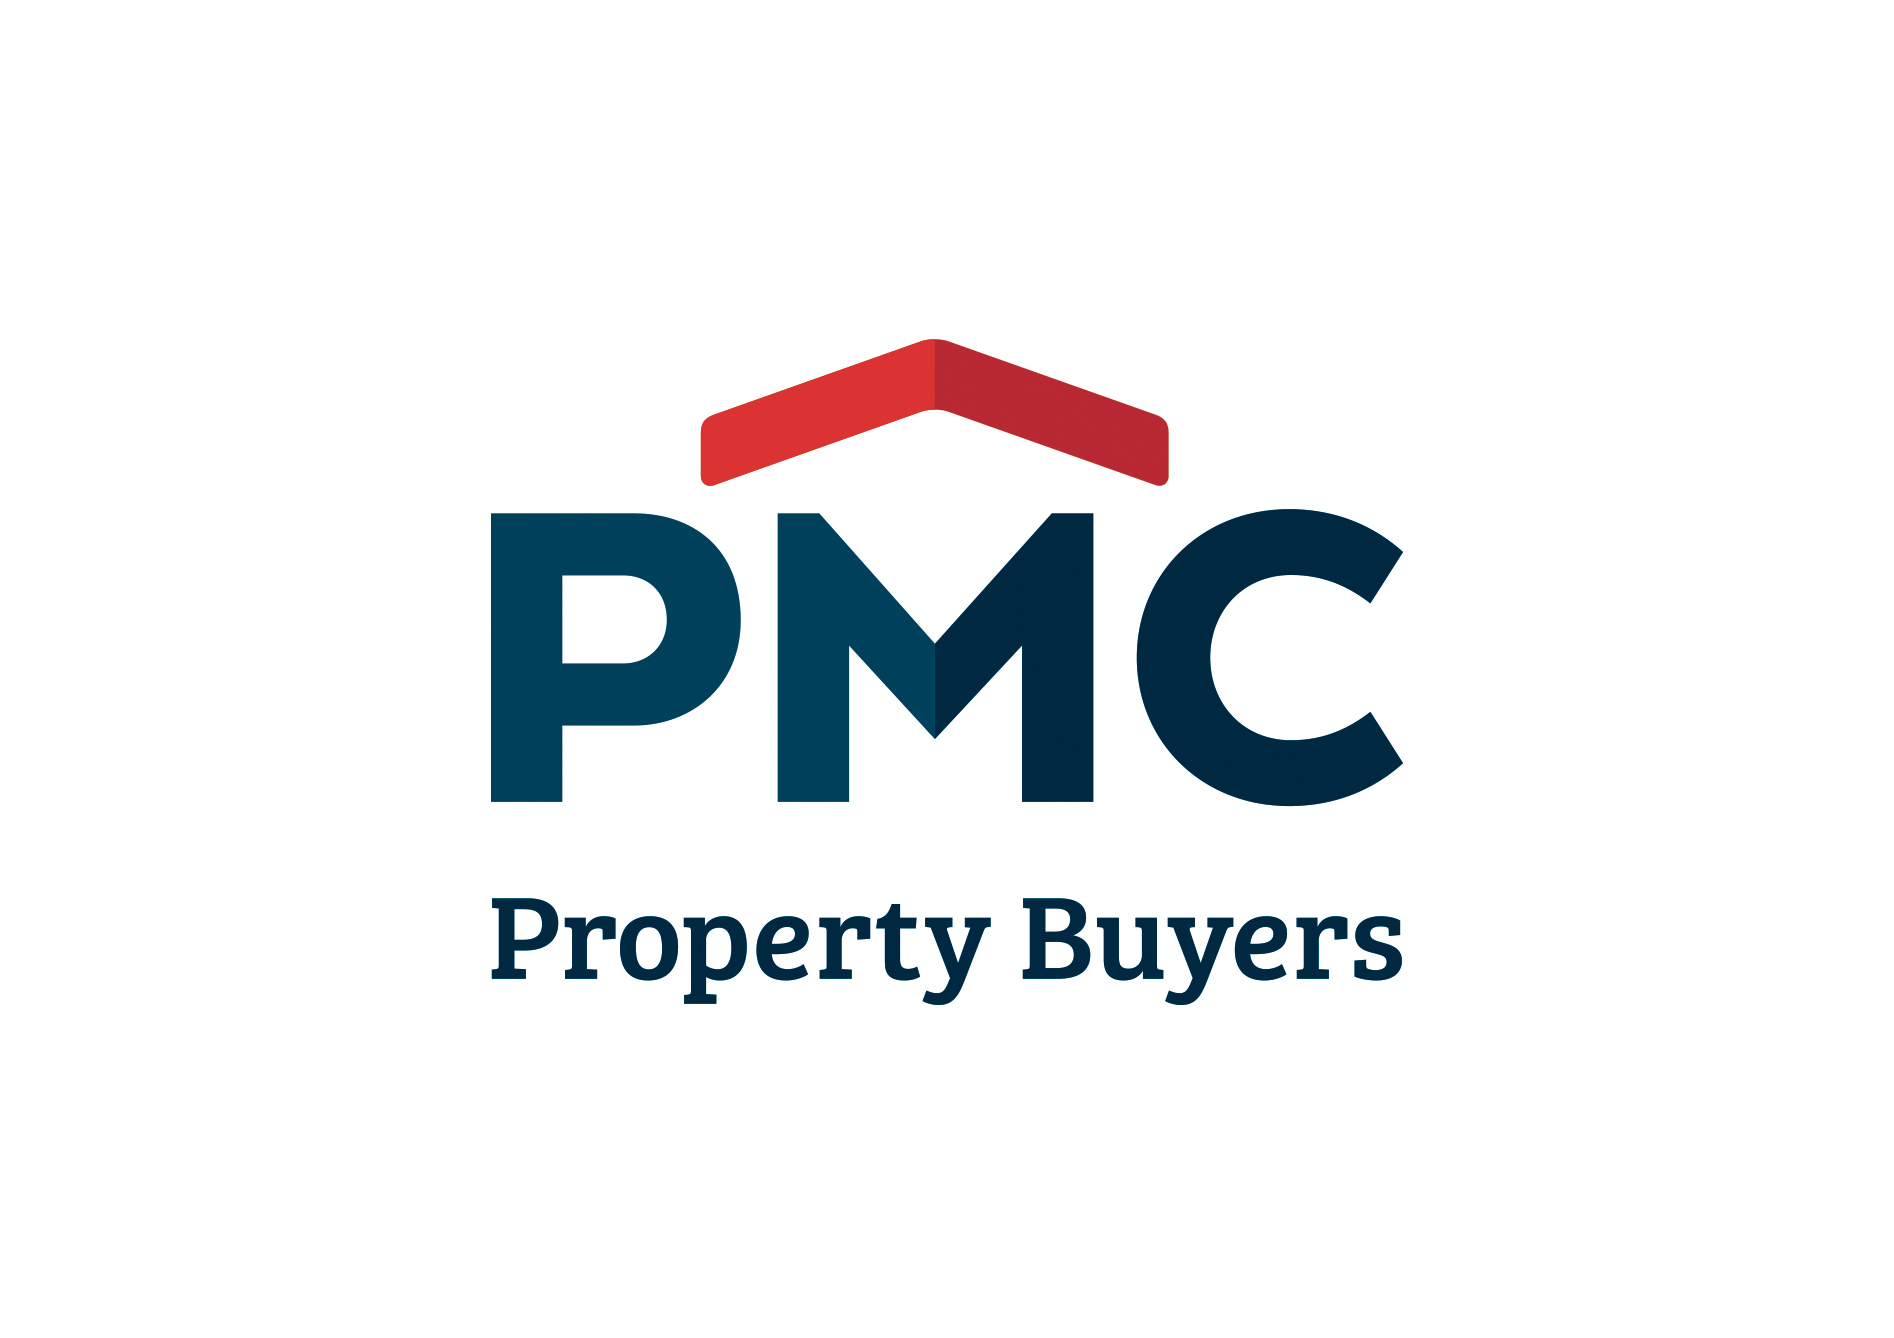 PMC Property Buyers